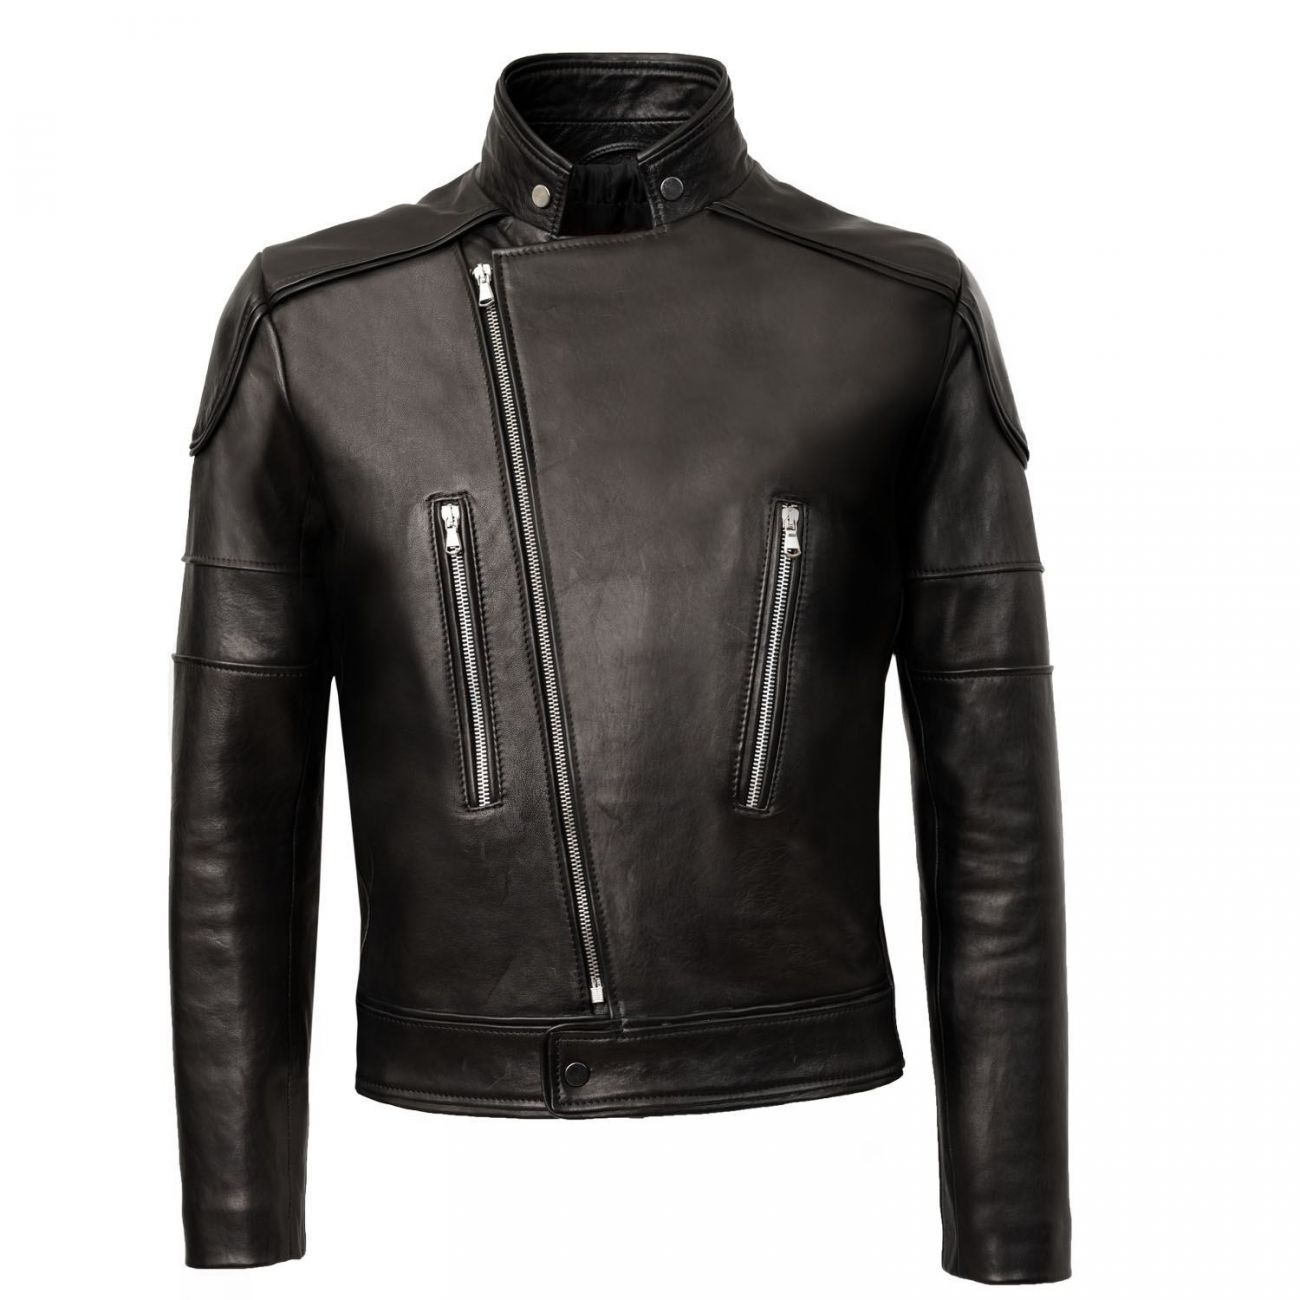 Sport Leather Jackets